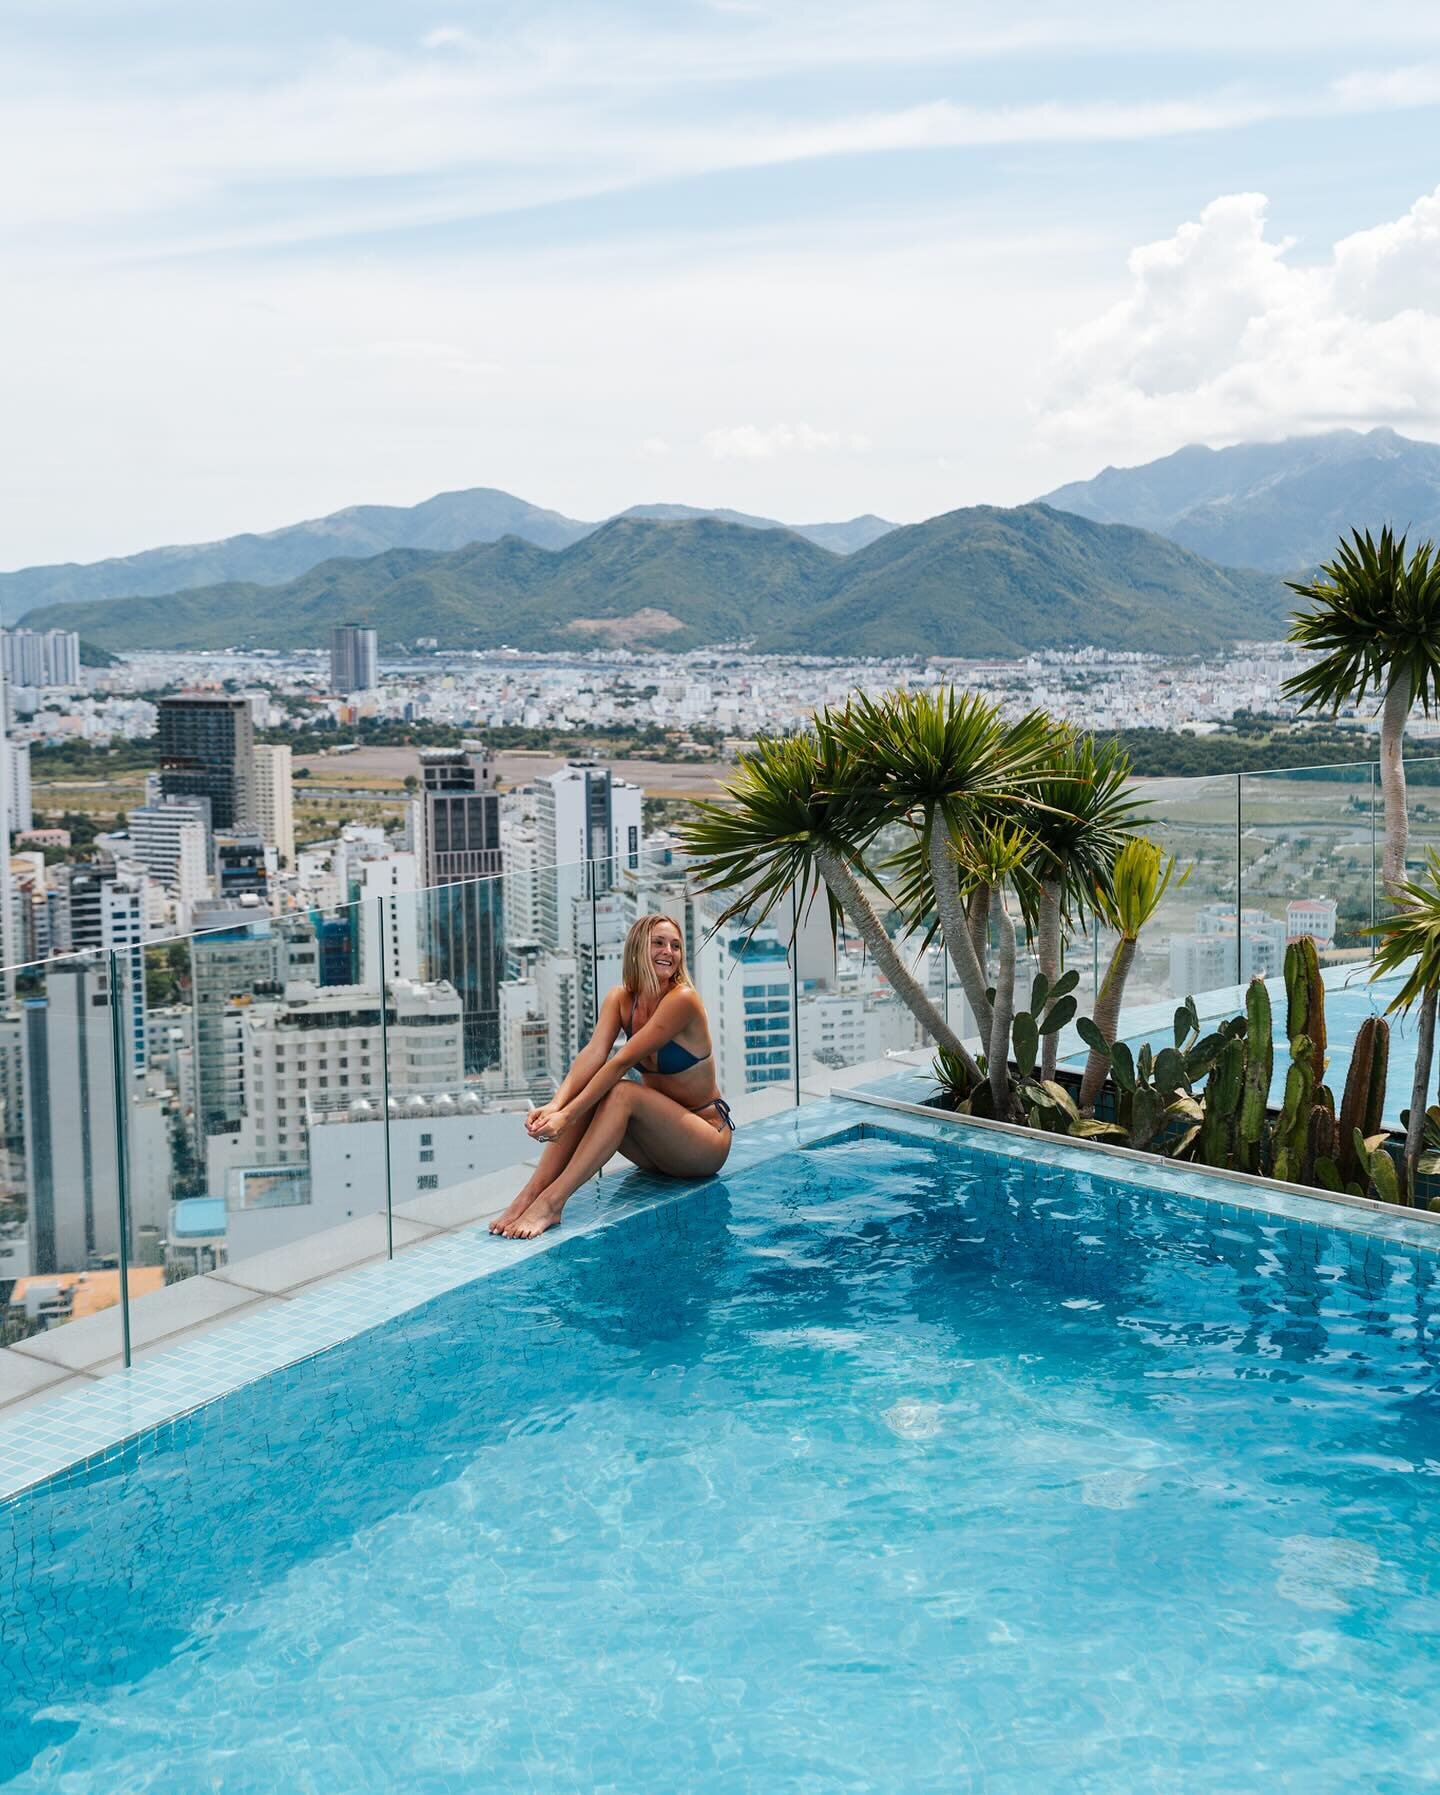 Swipe to see the 40th floor, glass bottom pool in Vietnam 👉🏼

This was one of those travel experiences that we had no idea it existed until we drove by. We were looking up at the beautiful skyline, and we saw this pool overhanging one of the talles